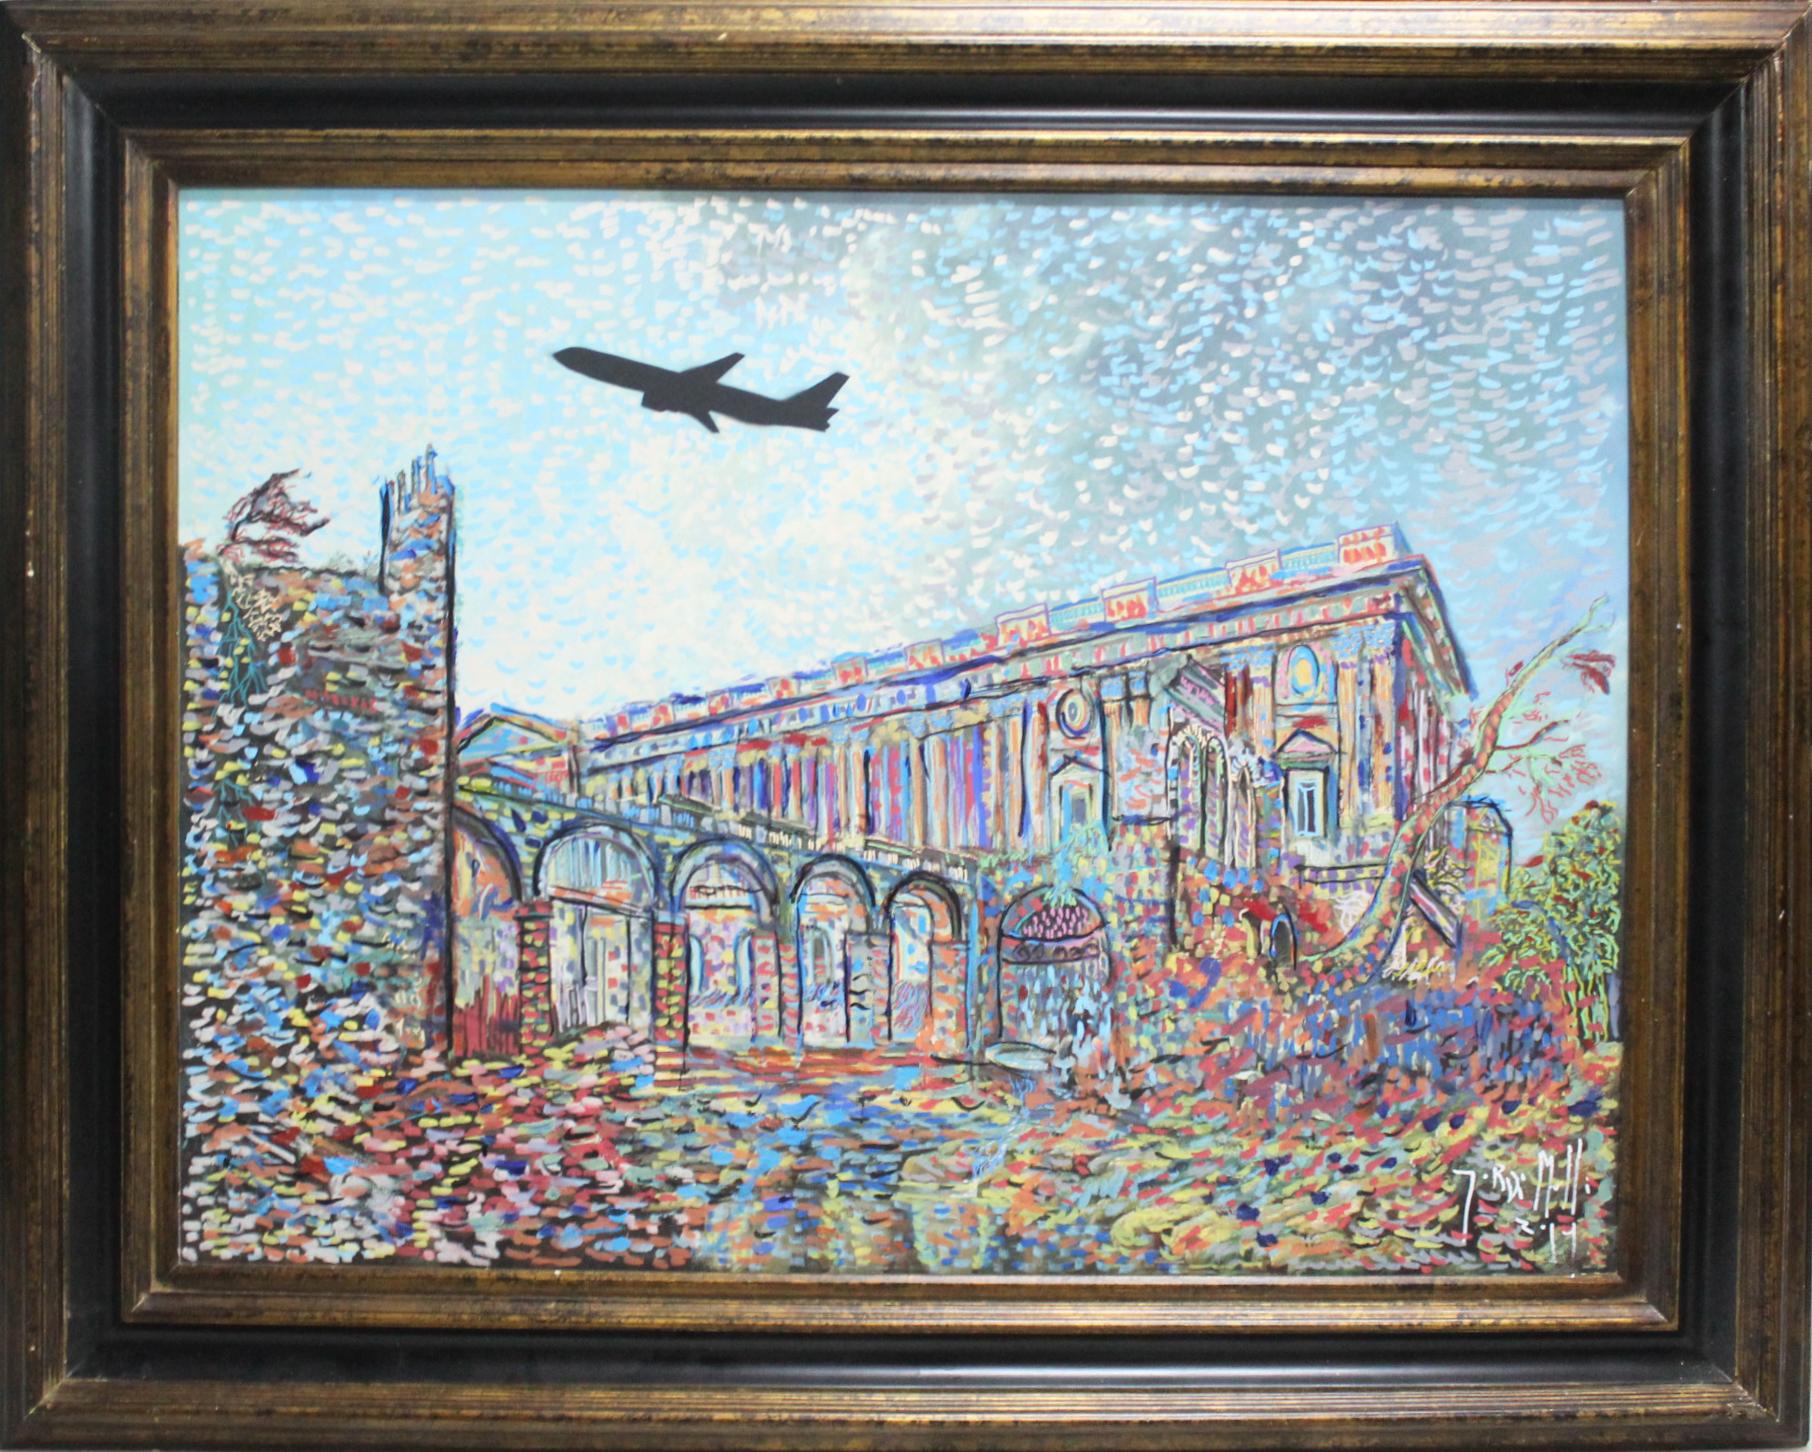 2014 pointillist architecture and plain painting by artist and actor Jordi Mollá.

Dimensions without frame: 88 x 118 cm
Dimensions with frame: 120 x 90 cm.
 